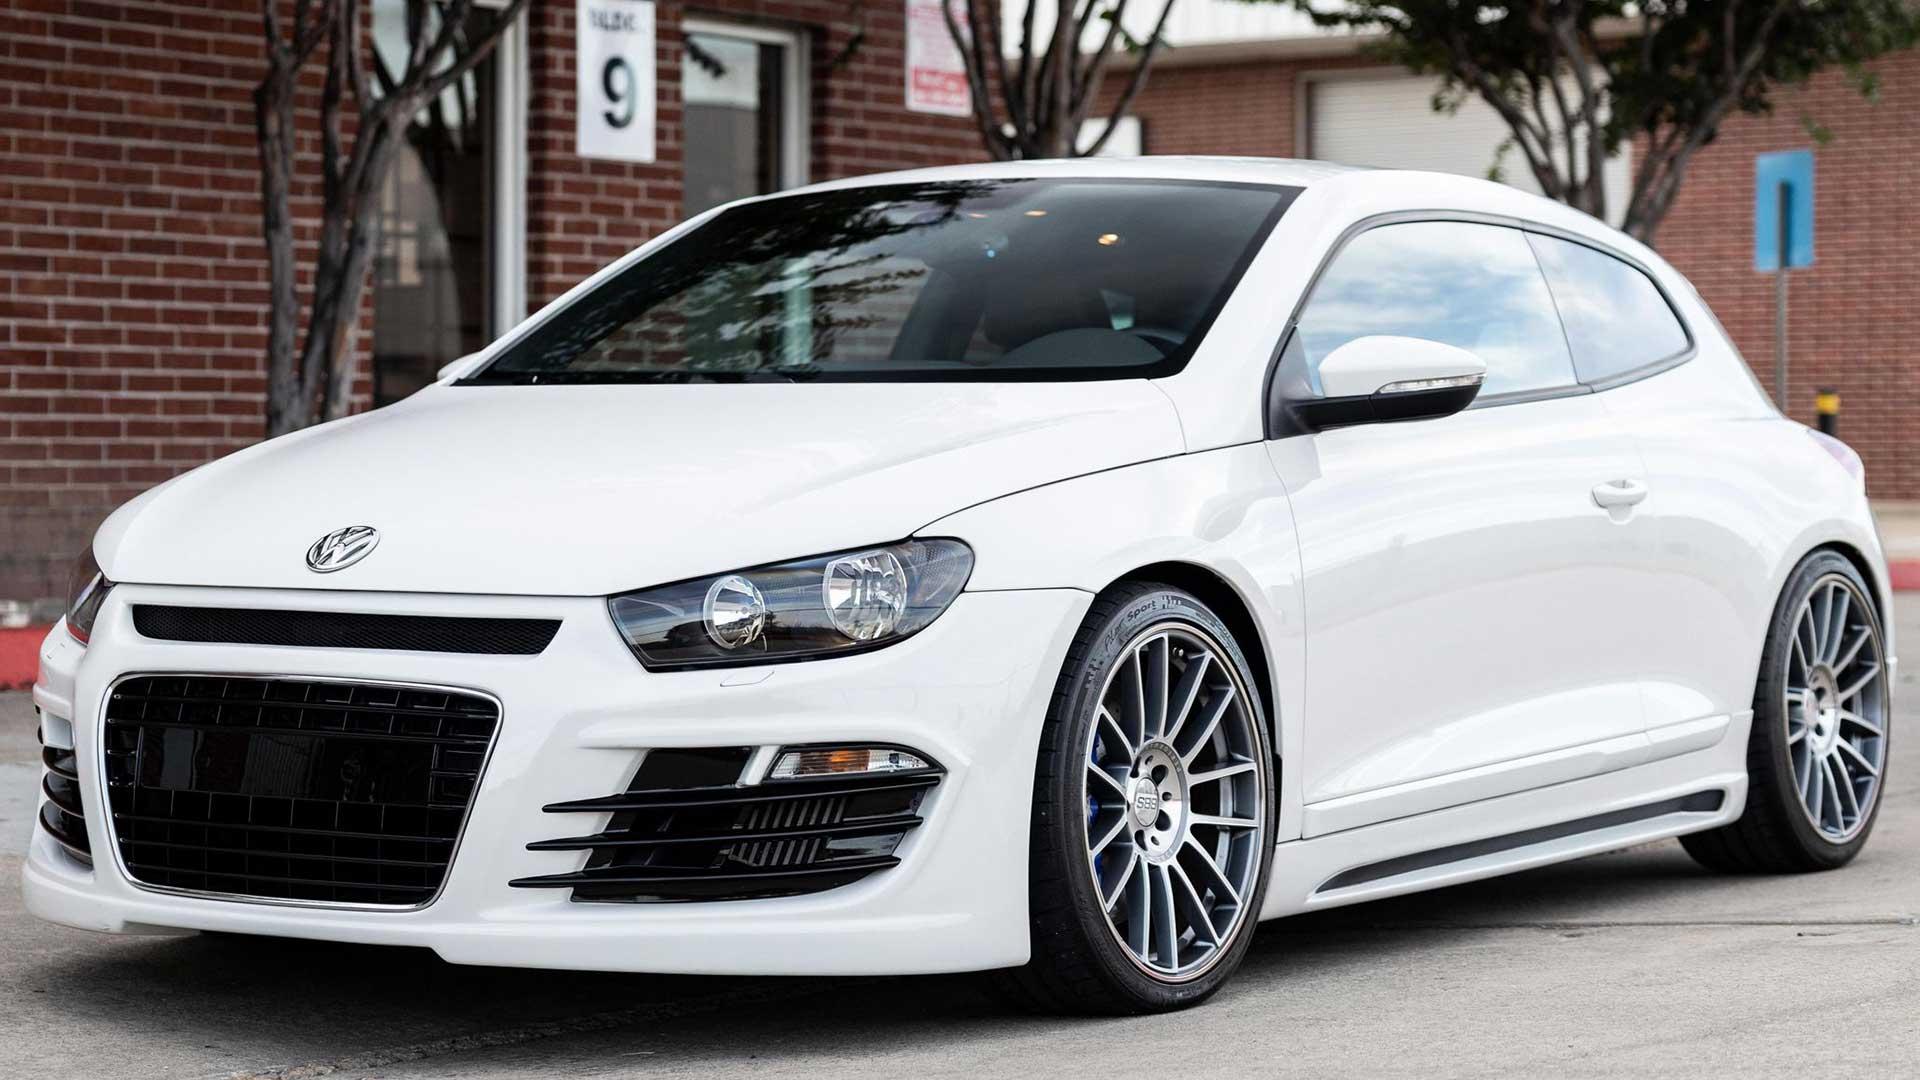 Why is there only one legal Volkswagen Scirocco in America?